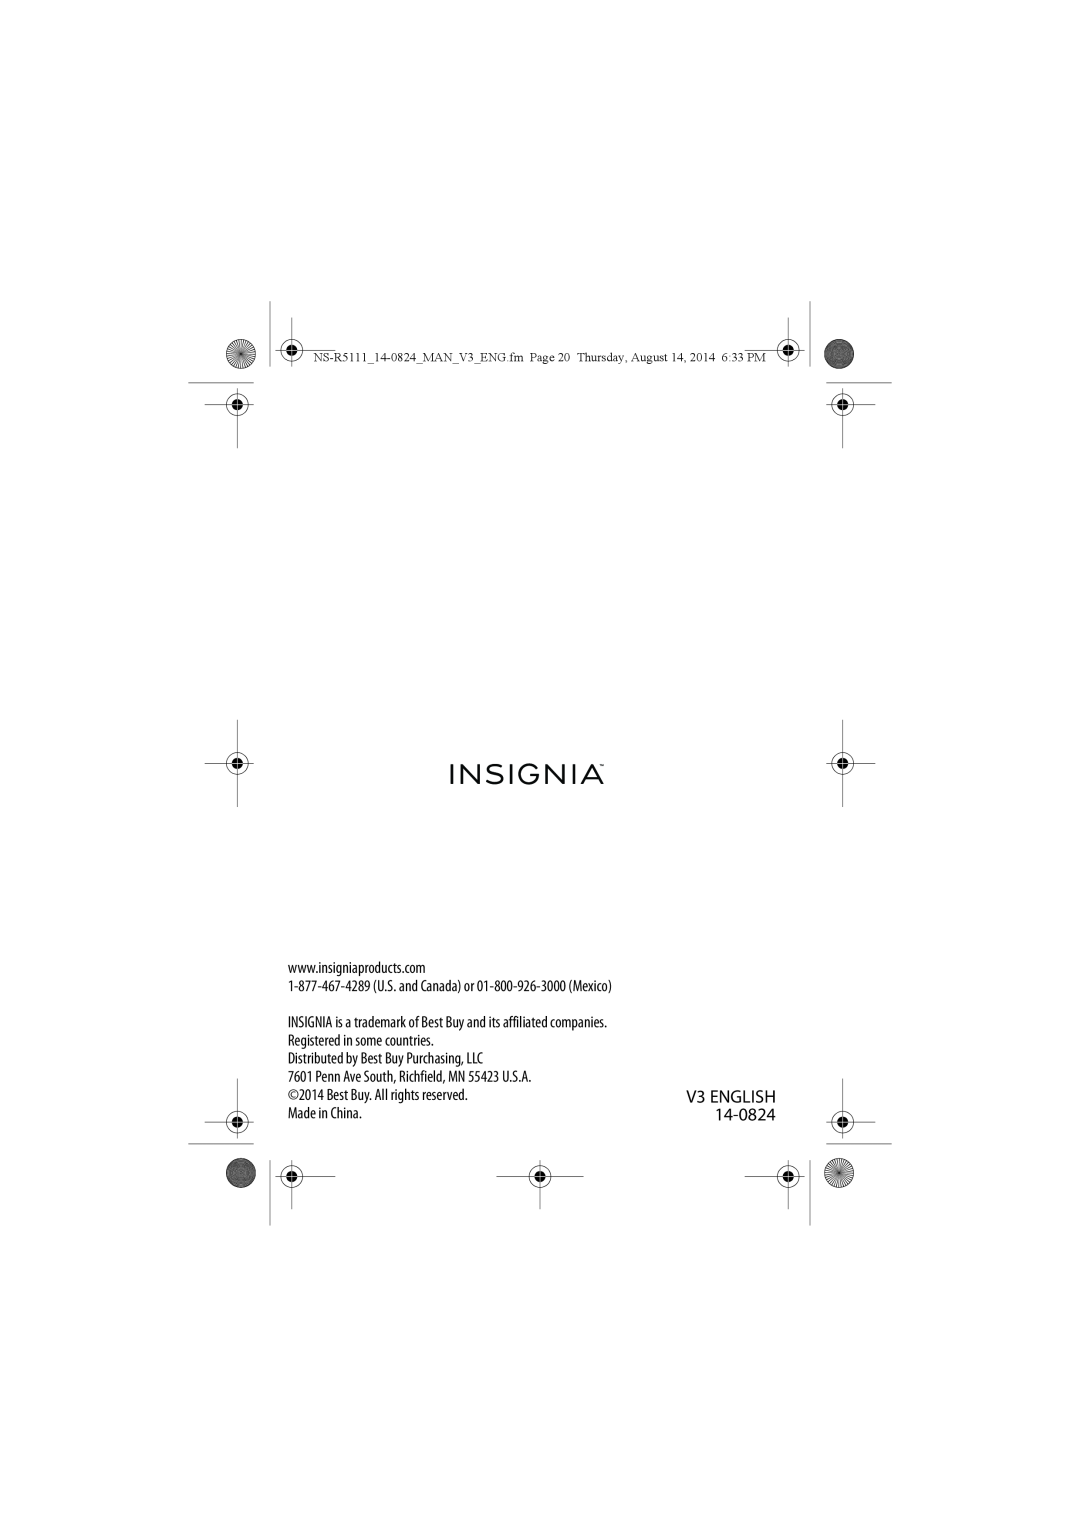 Insignia NS-R5111 manual V3 ENGLISH, Distributed by Best Buy Purchasing, LLC, Made in China 